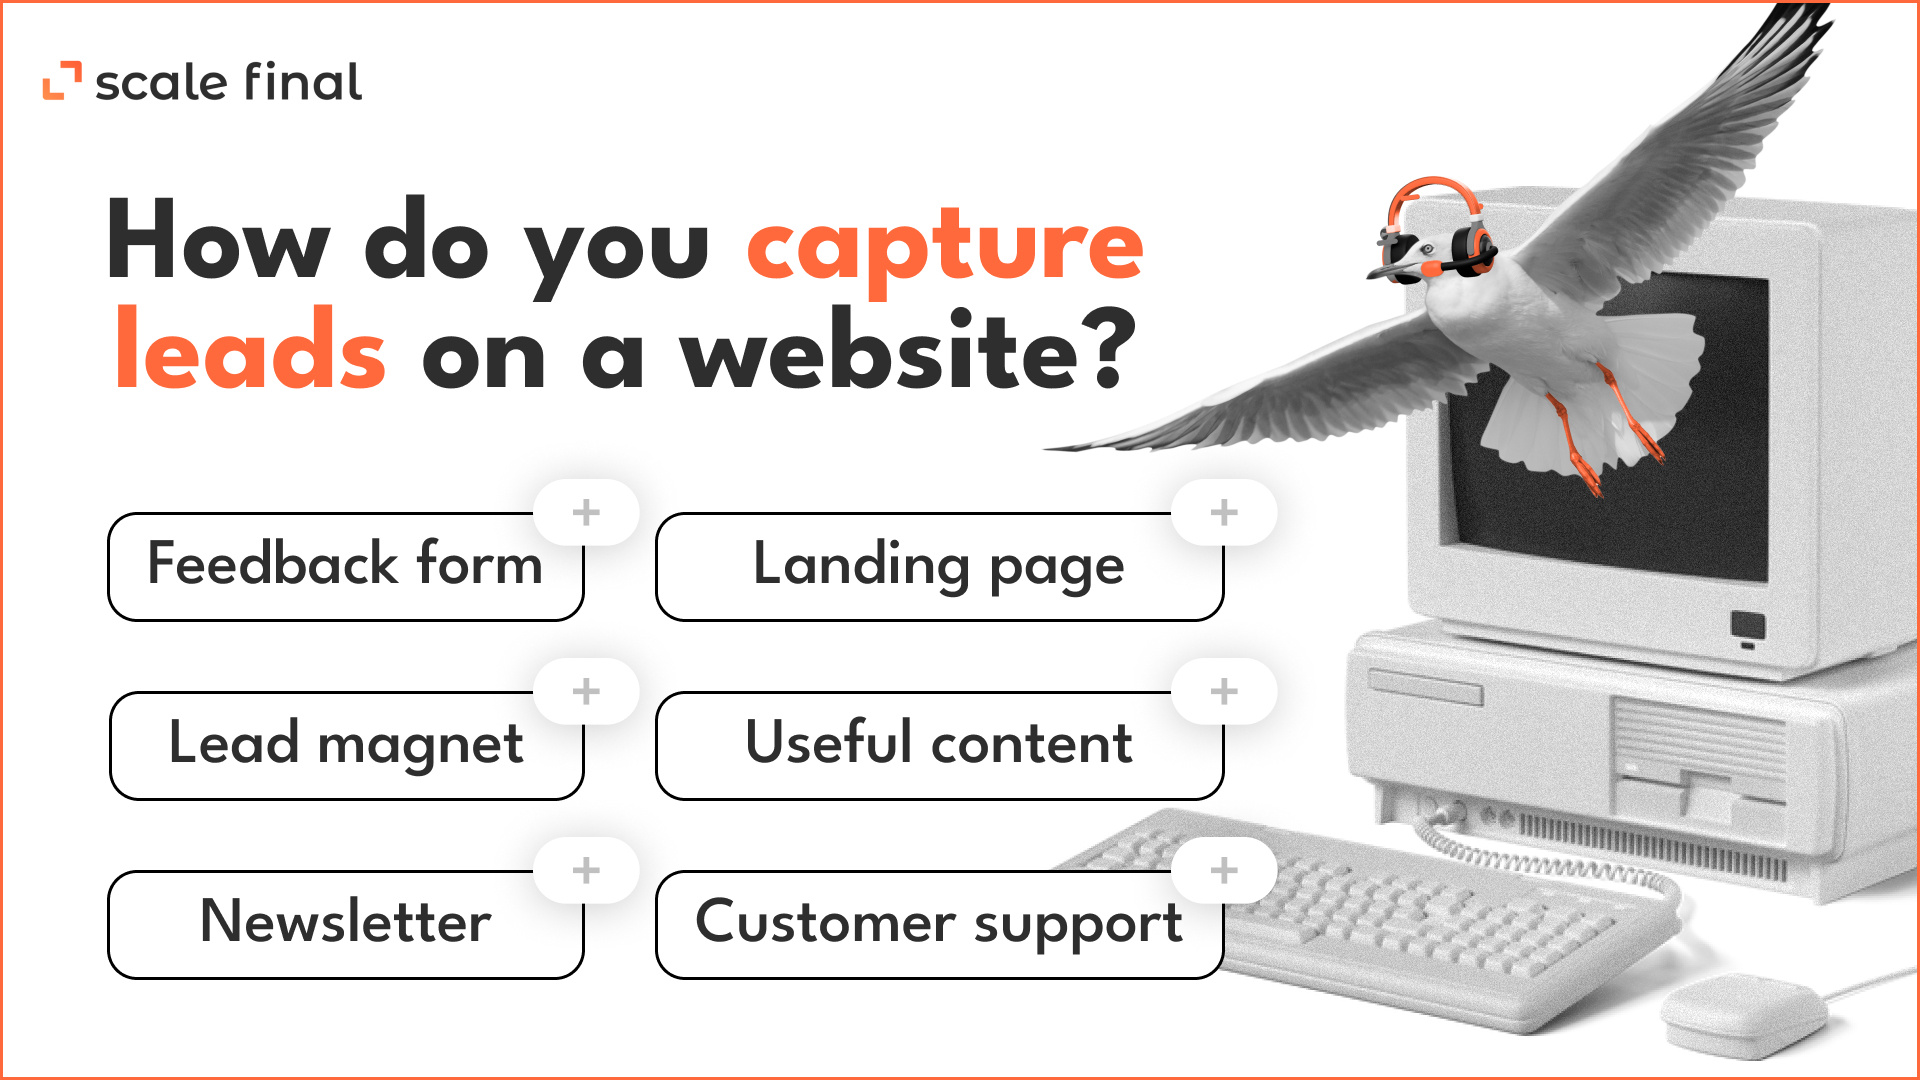 How do you capture leads on a website?Feedback formLead magnetNewsletterLanding pageUseful contentCustomer support